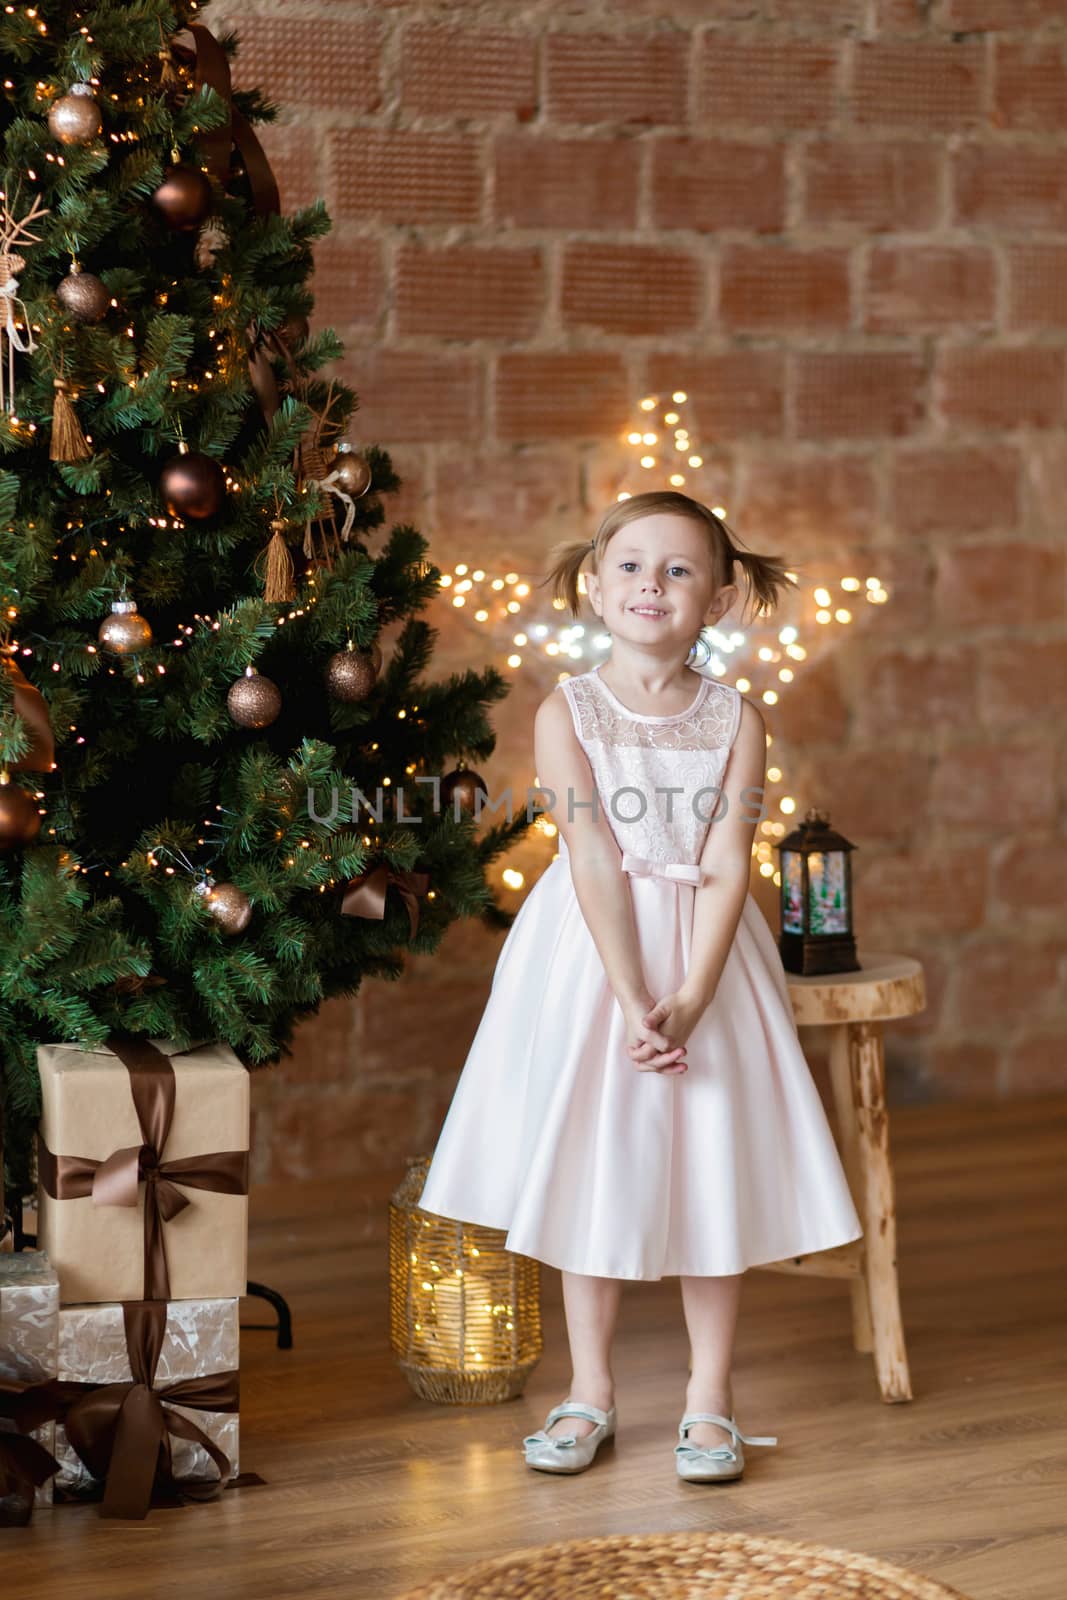 The adorable little girl in gorgeous dress standing near Christmas tree by galinasharapova